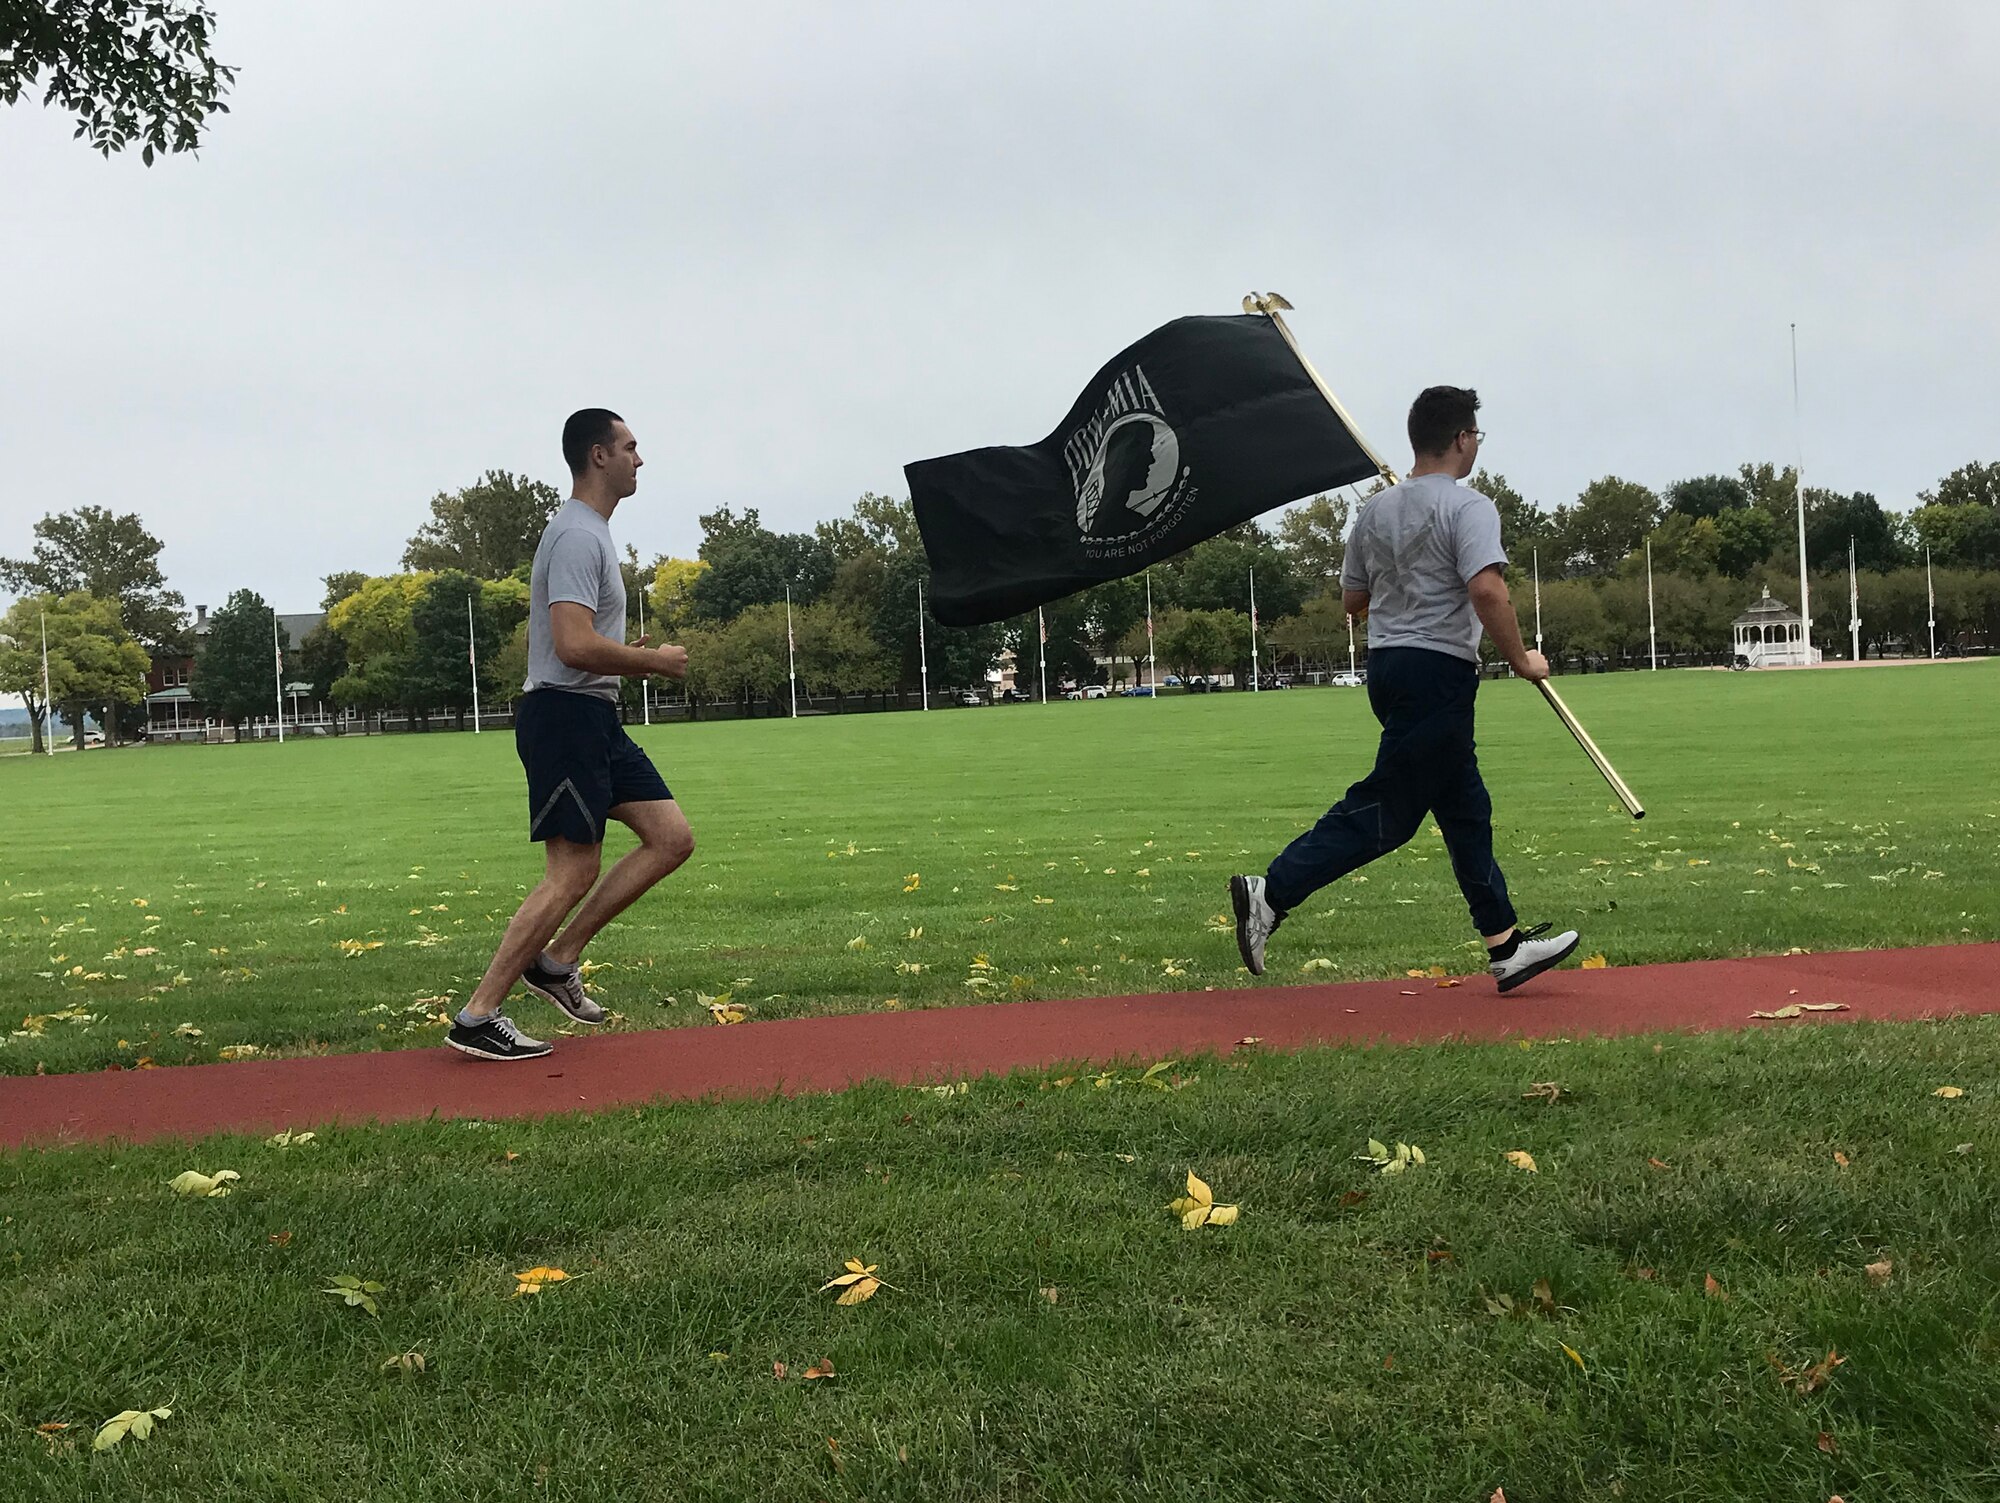 Members running with POW/MIA flag during 24 hour remembrance run